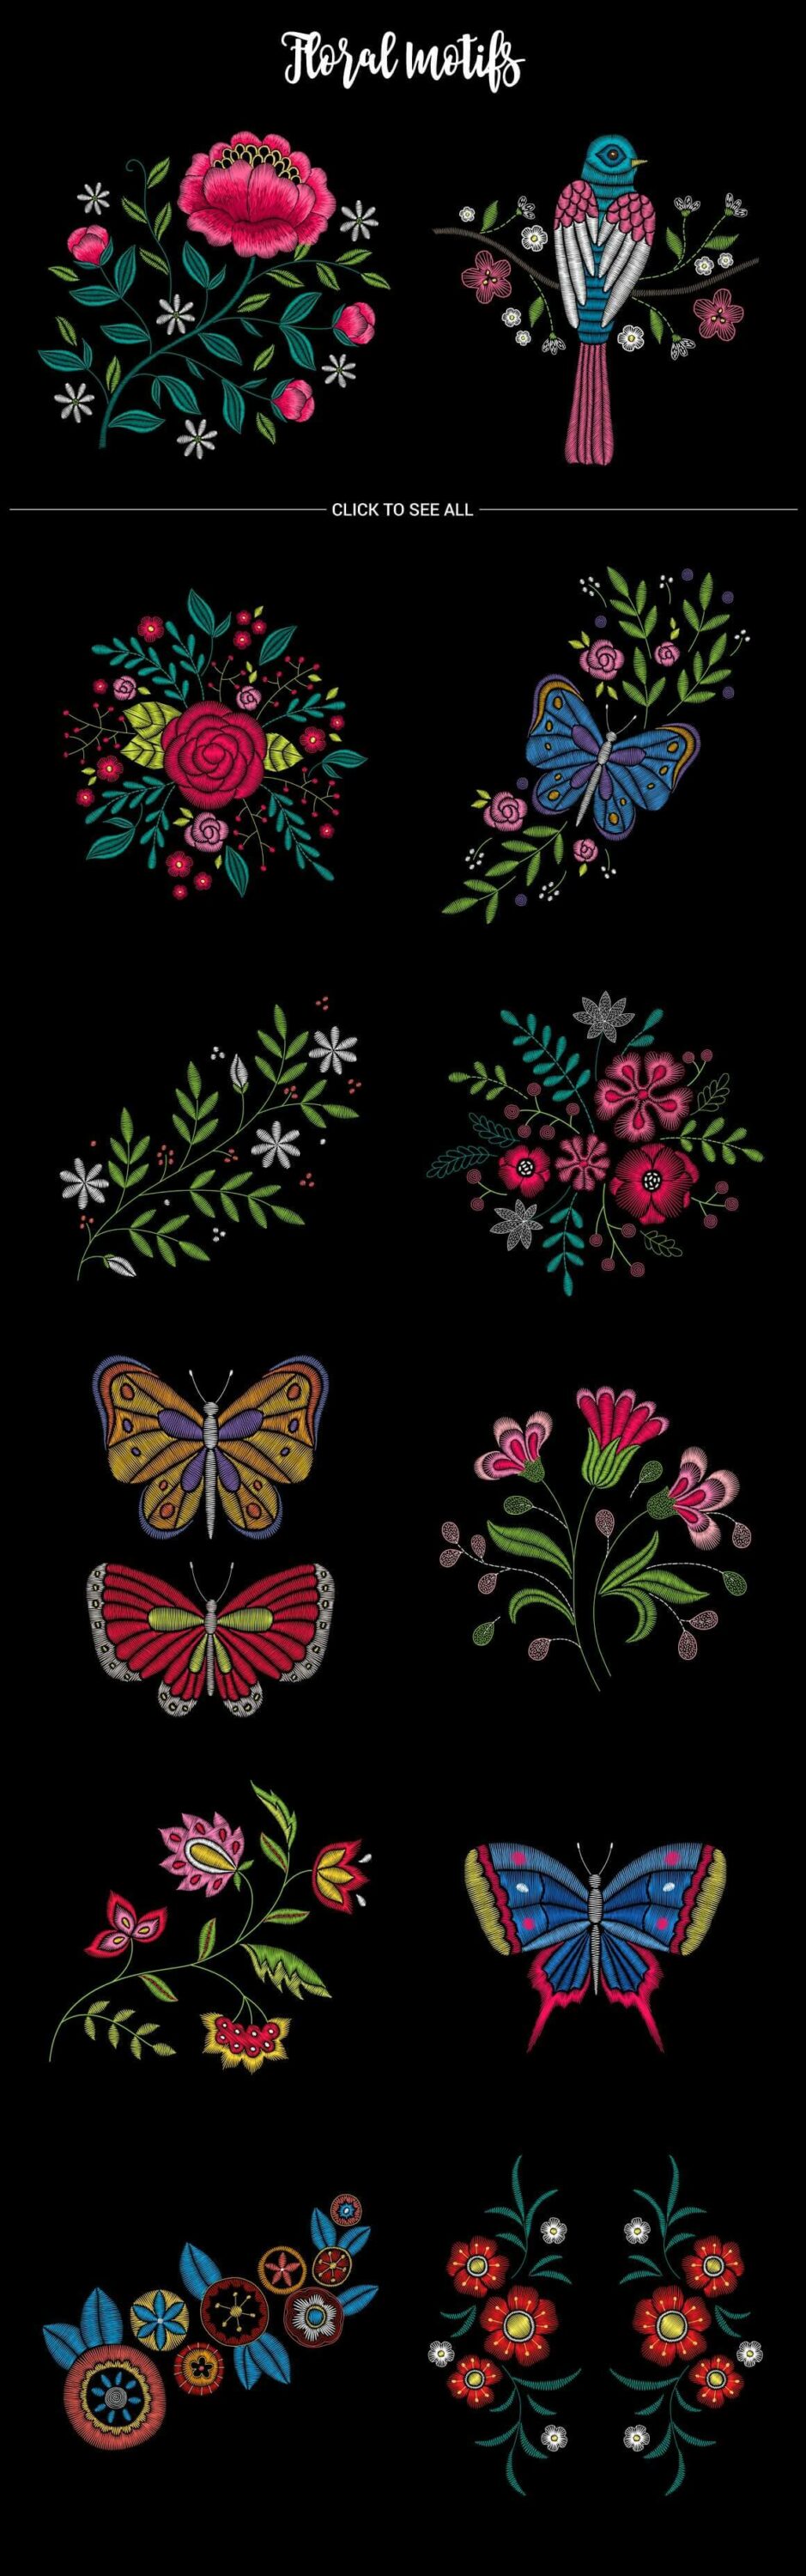 Floral motifs with butterflies and birds.